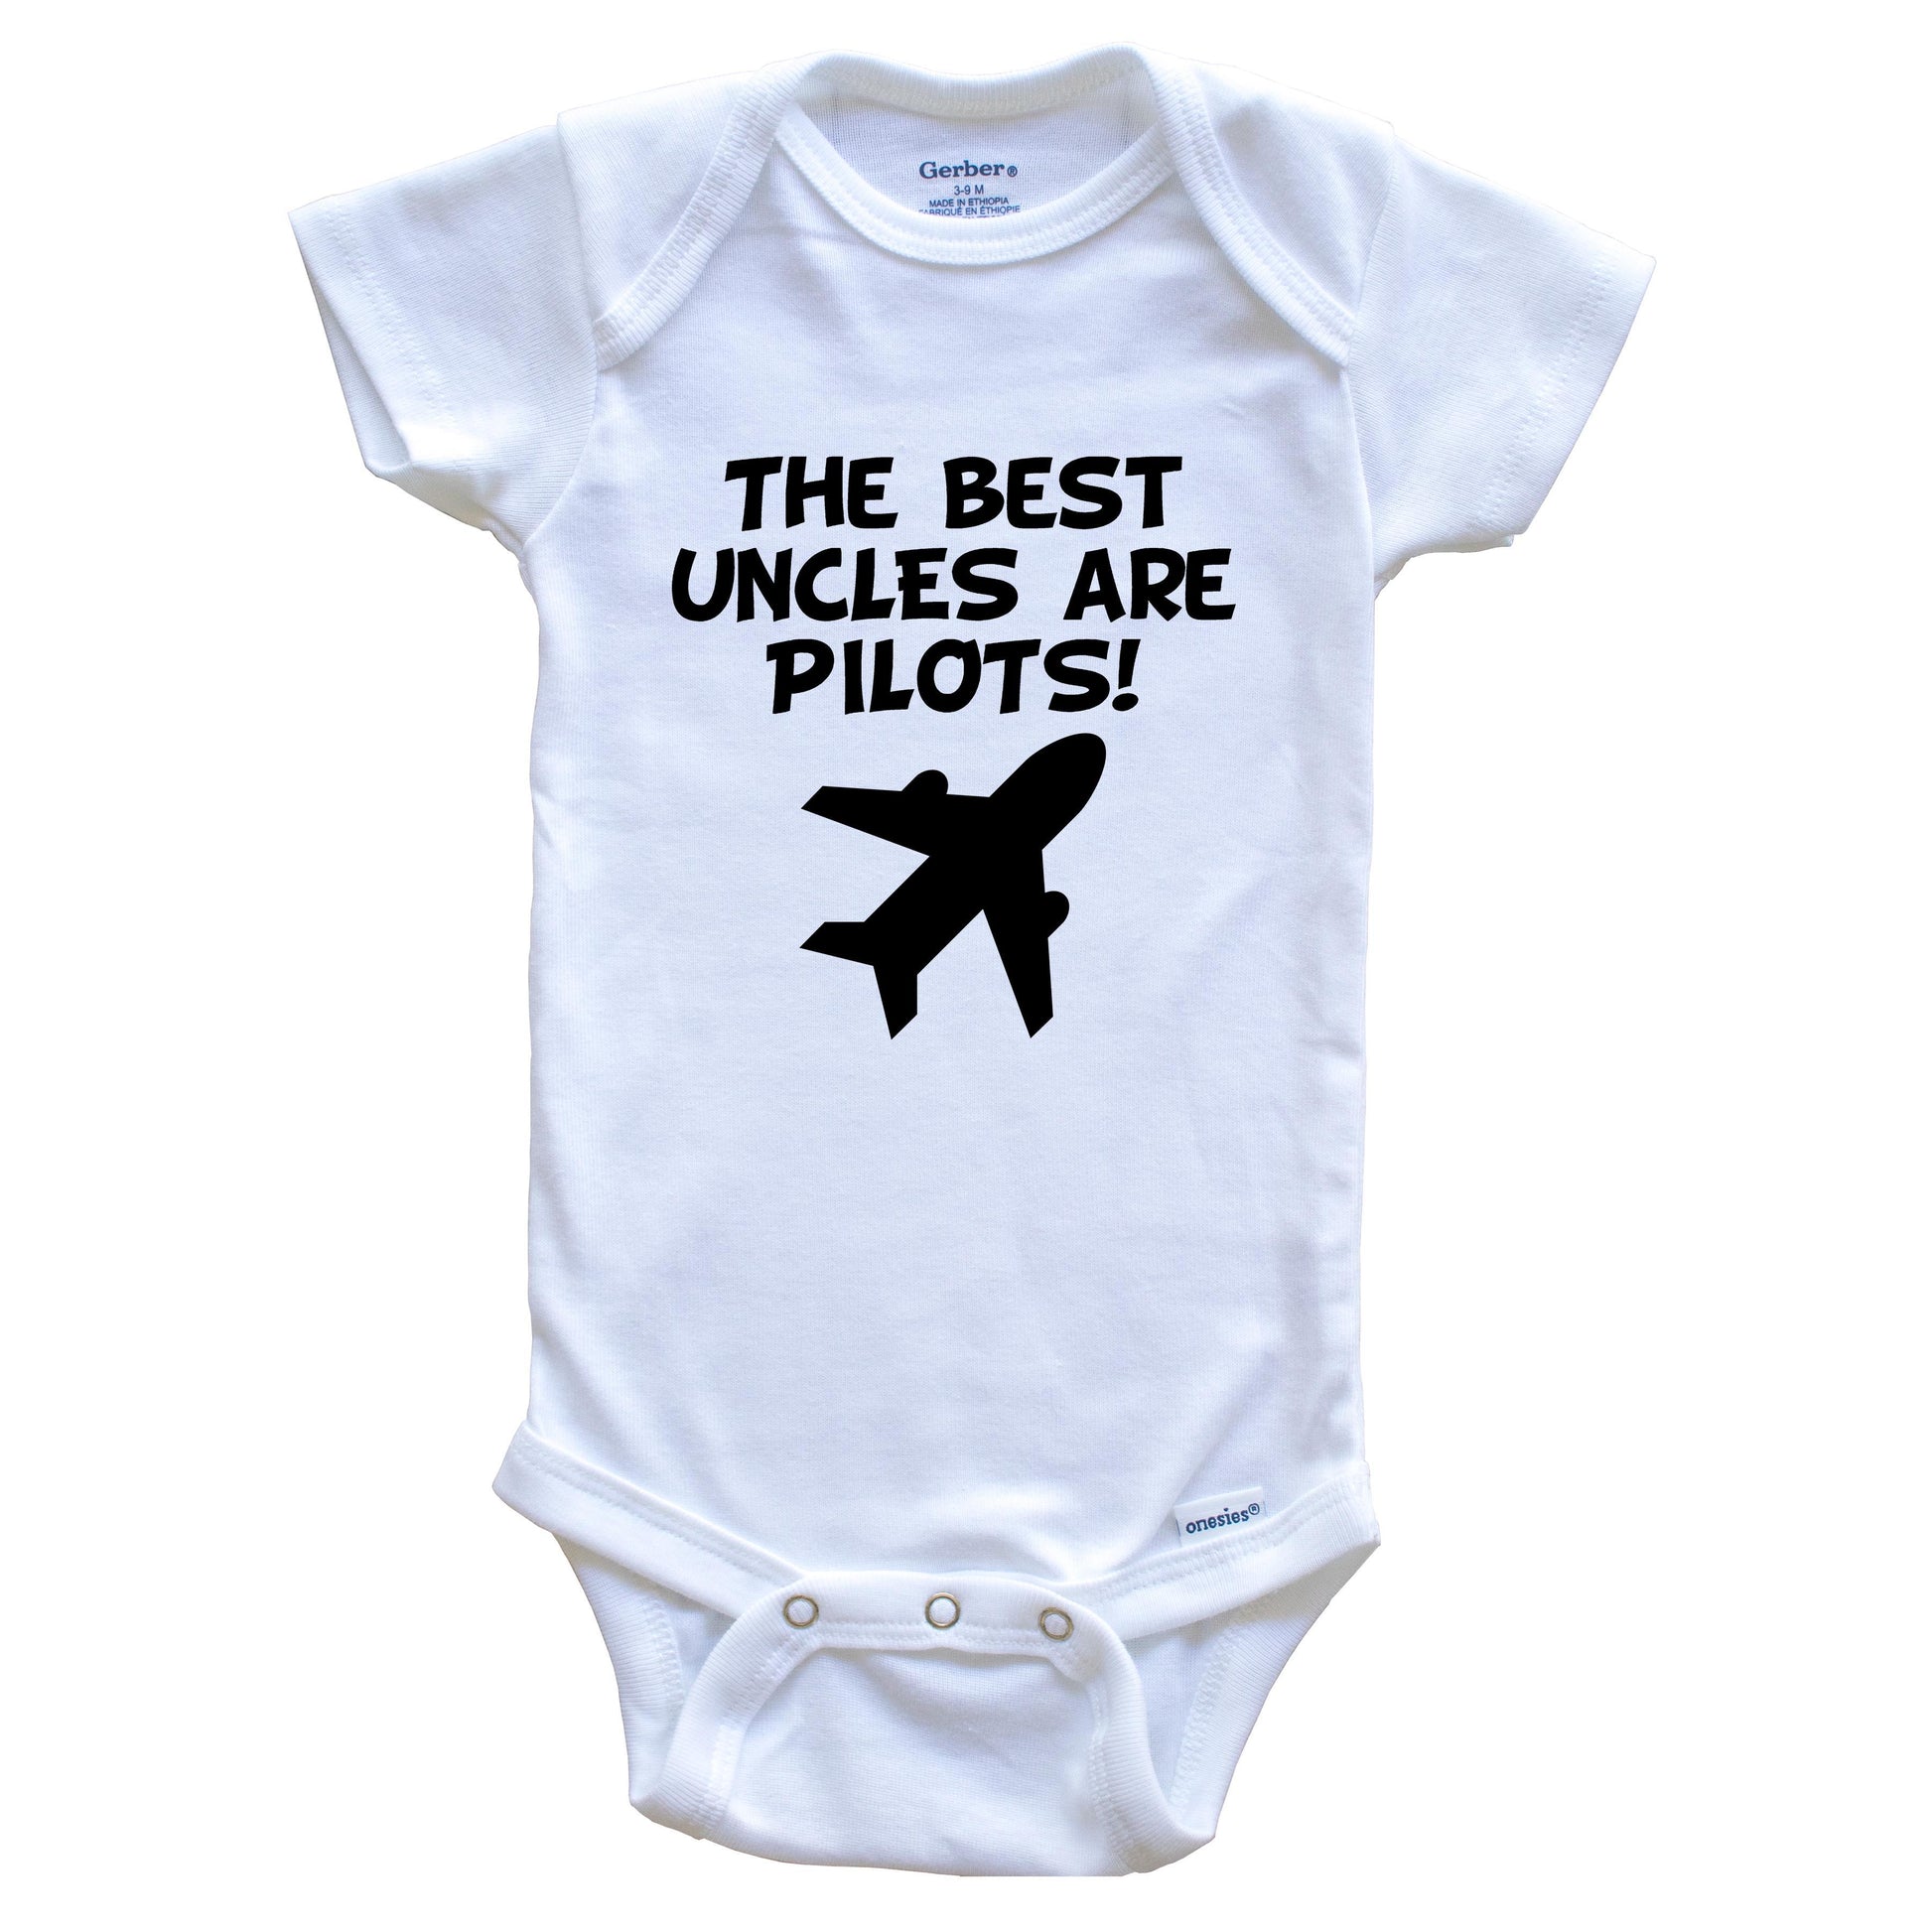 The Best Uncles Are Pilots Funny Niece Nephew Baby Onesie